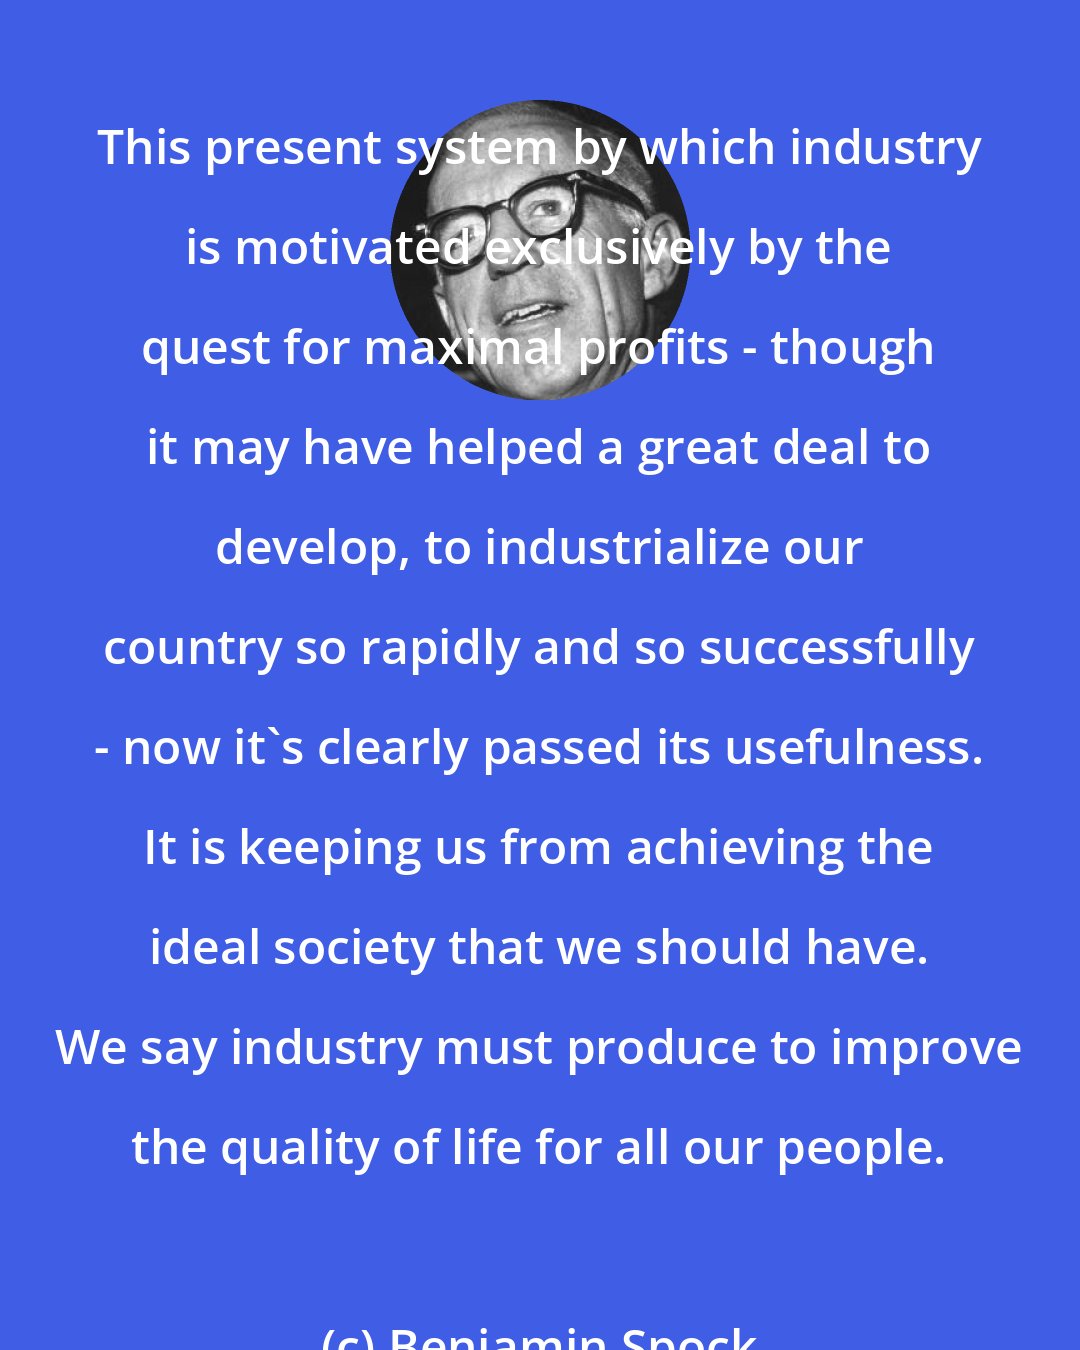 Benjamin Spock: This present system by which industry is motivated exclusively by the quest for maximal profits - though it may have helped a great deal to develop, to industrialize our country so rapidly and so successfully - now it's clearly passed its usefulness. It is keeping us from achieving the ideal society that we should have. We say industry must produce to improve the quality of life for all our people.